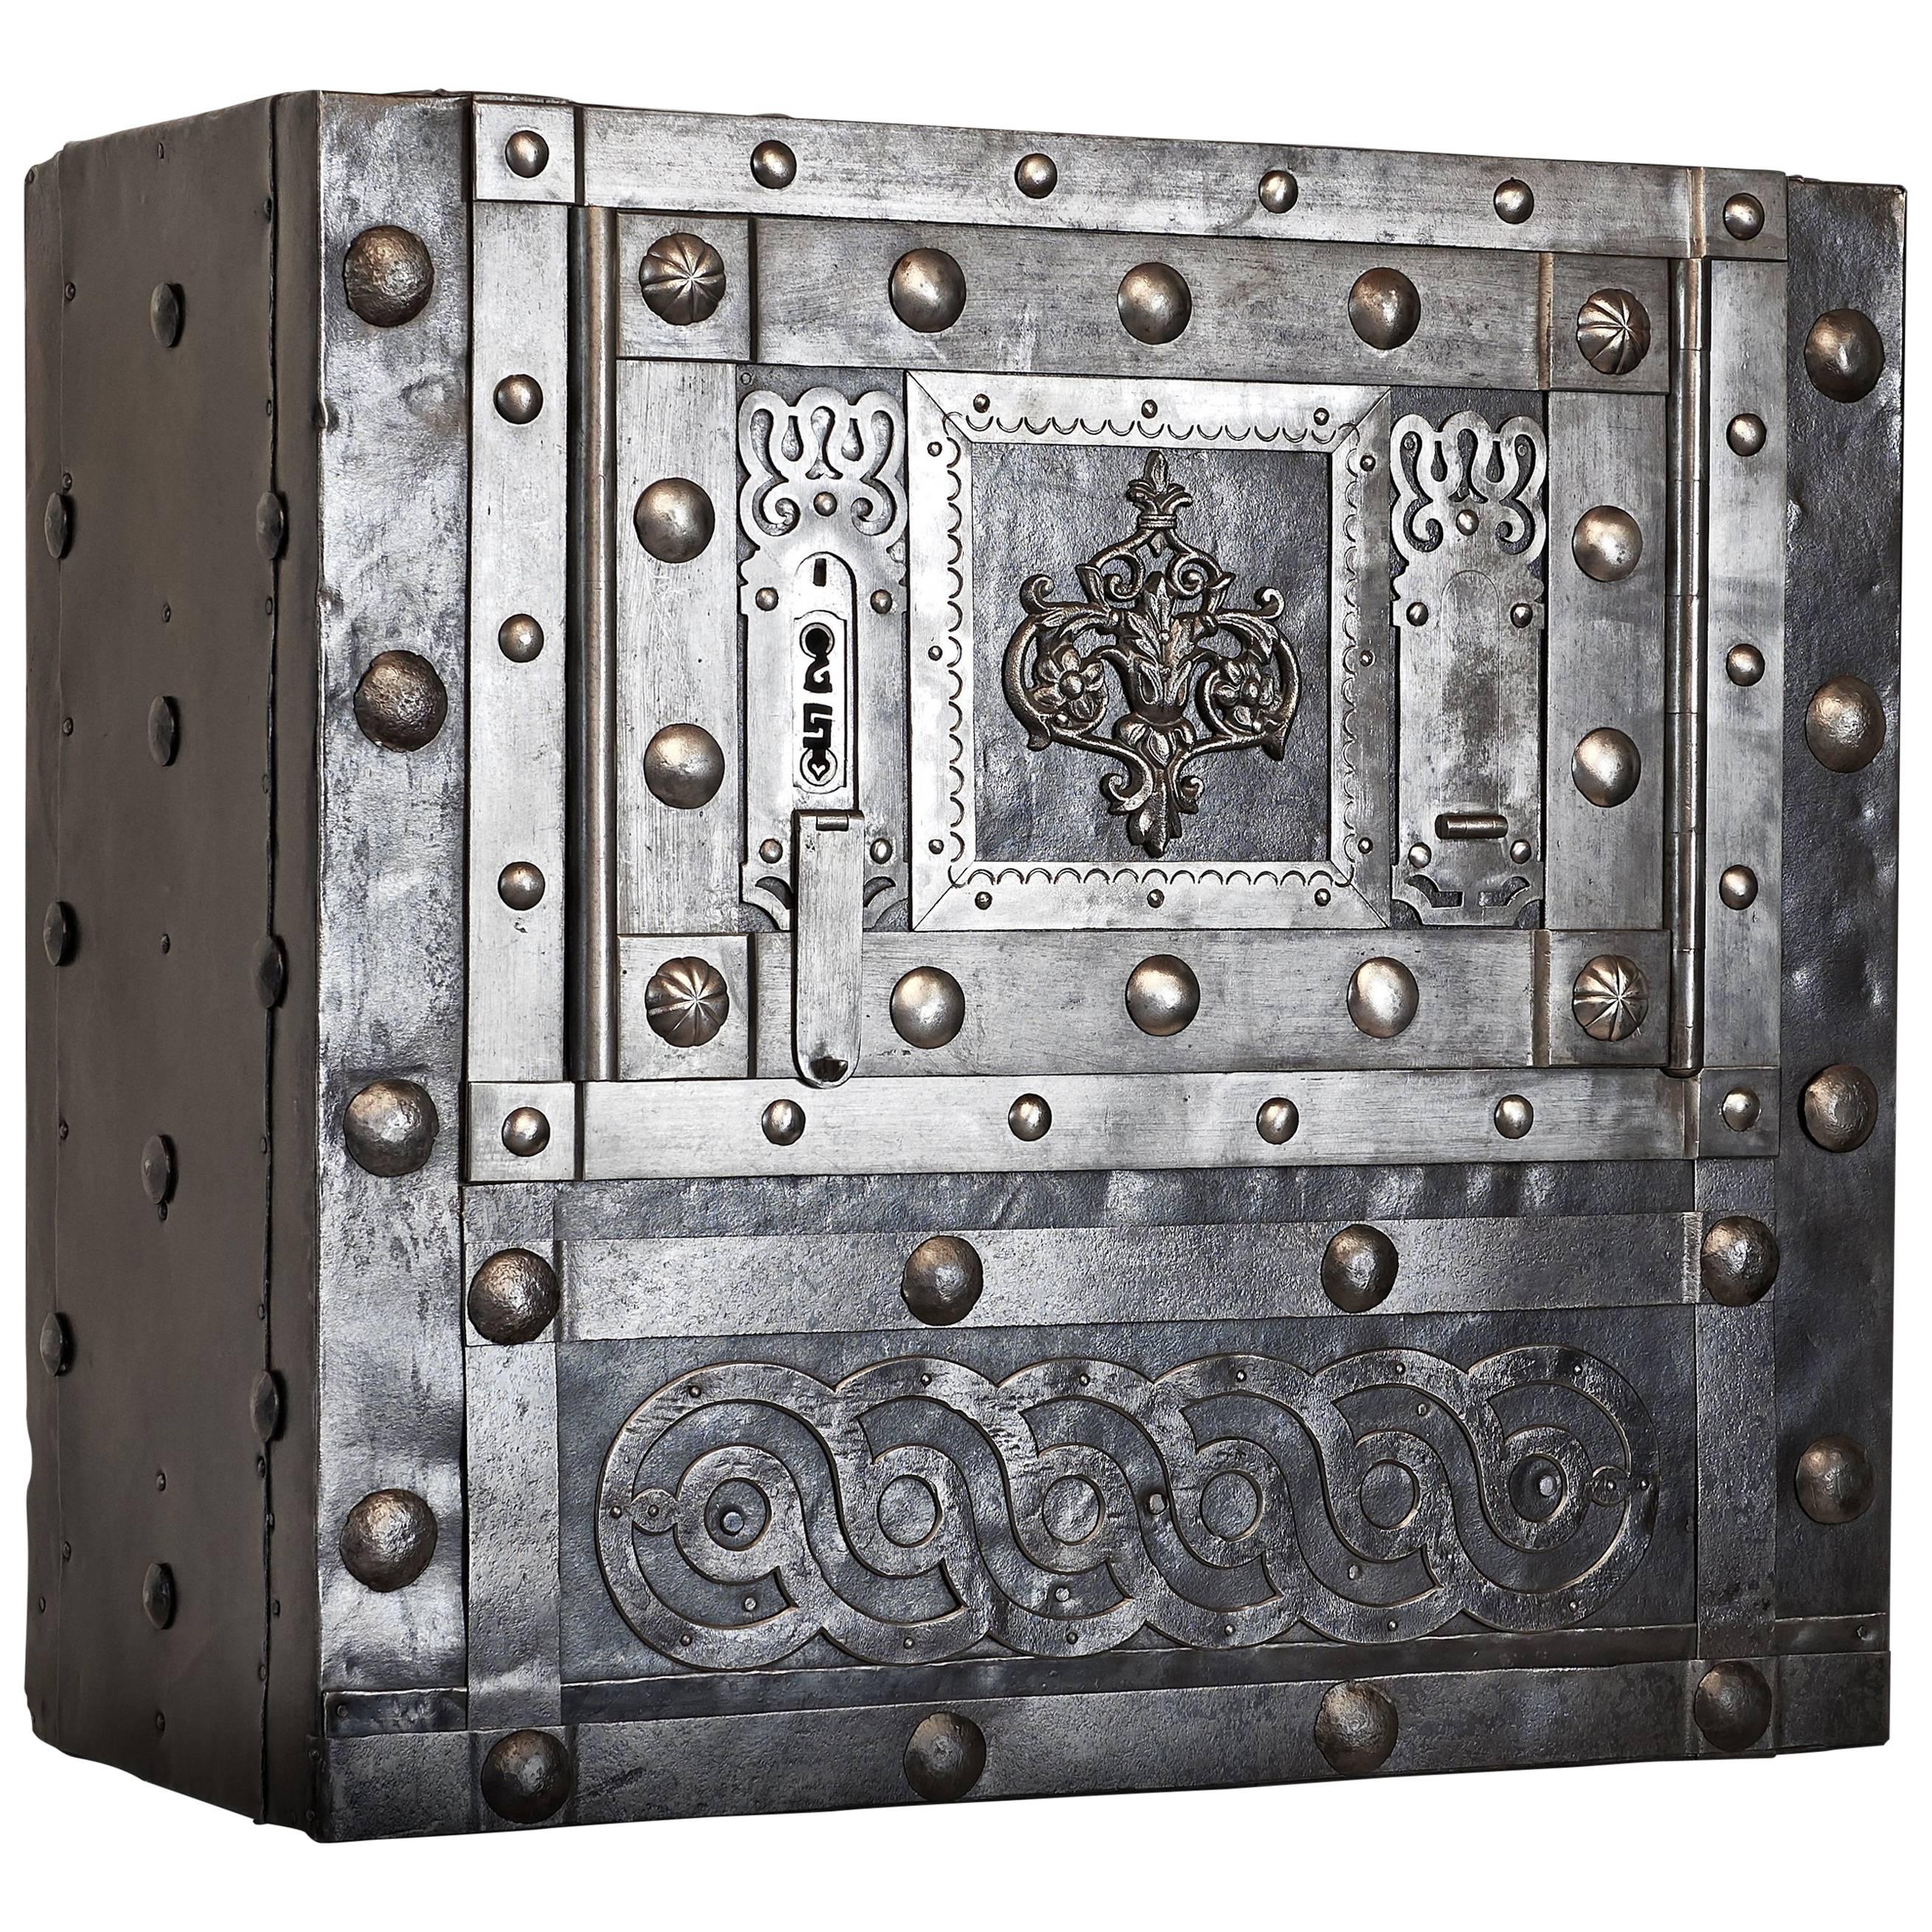 Early 19th Century Italian Antique Hobnail Safe